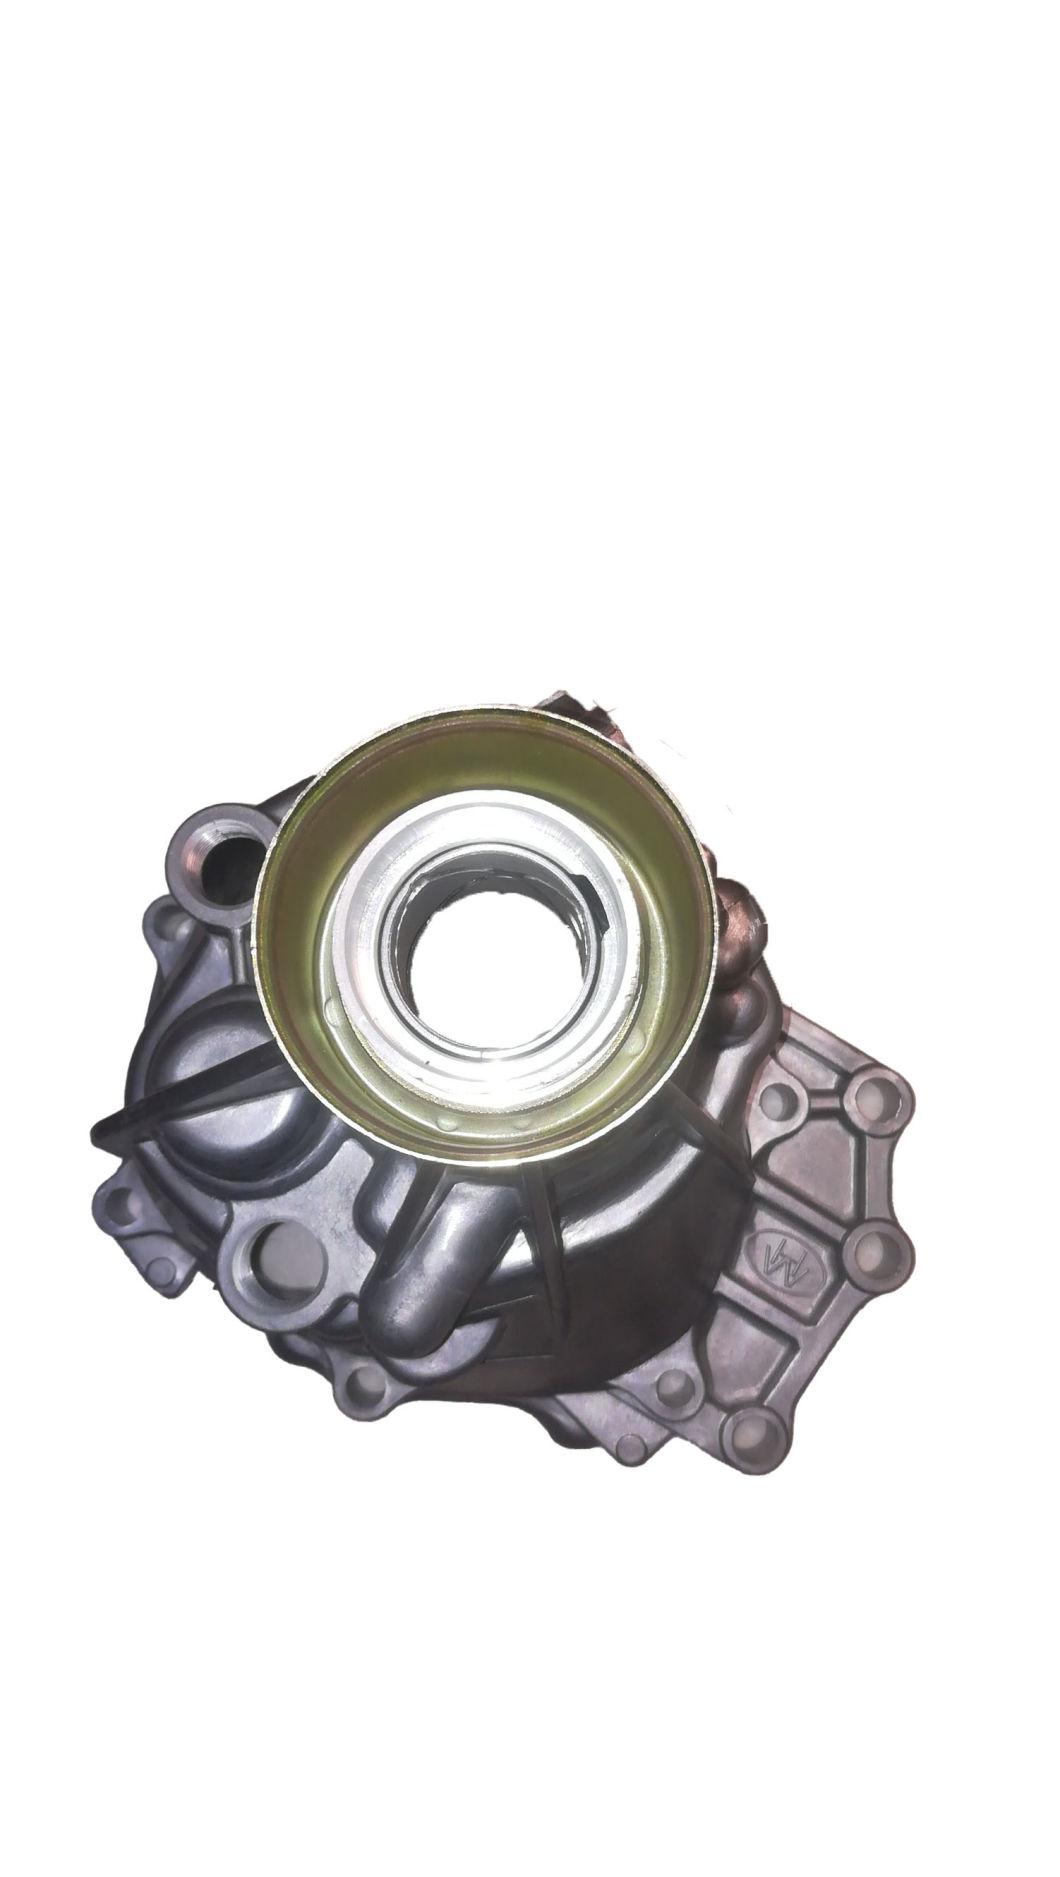 Vehicle Transmission Extension Box used for Changan 6350